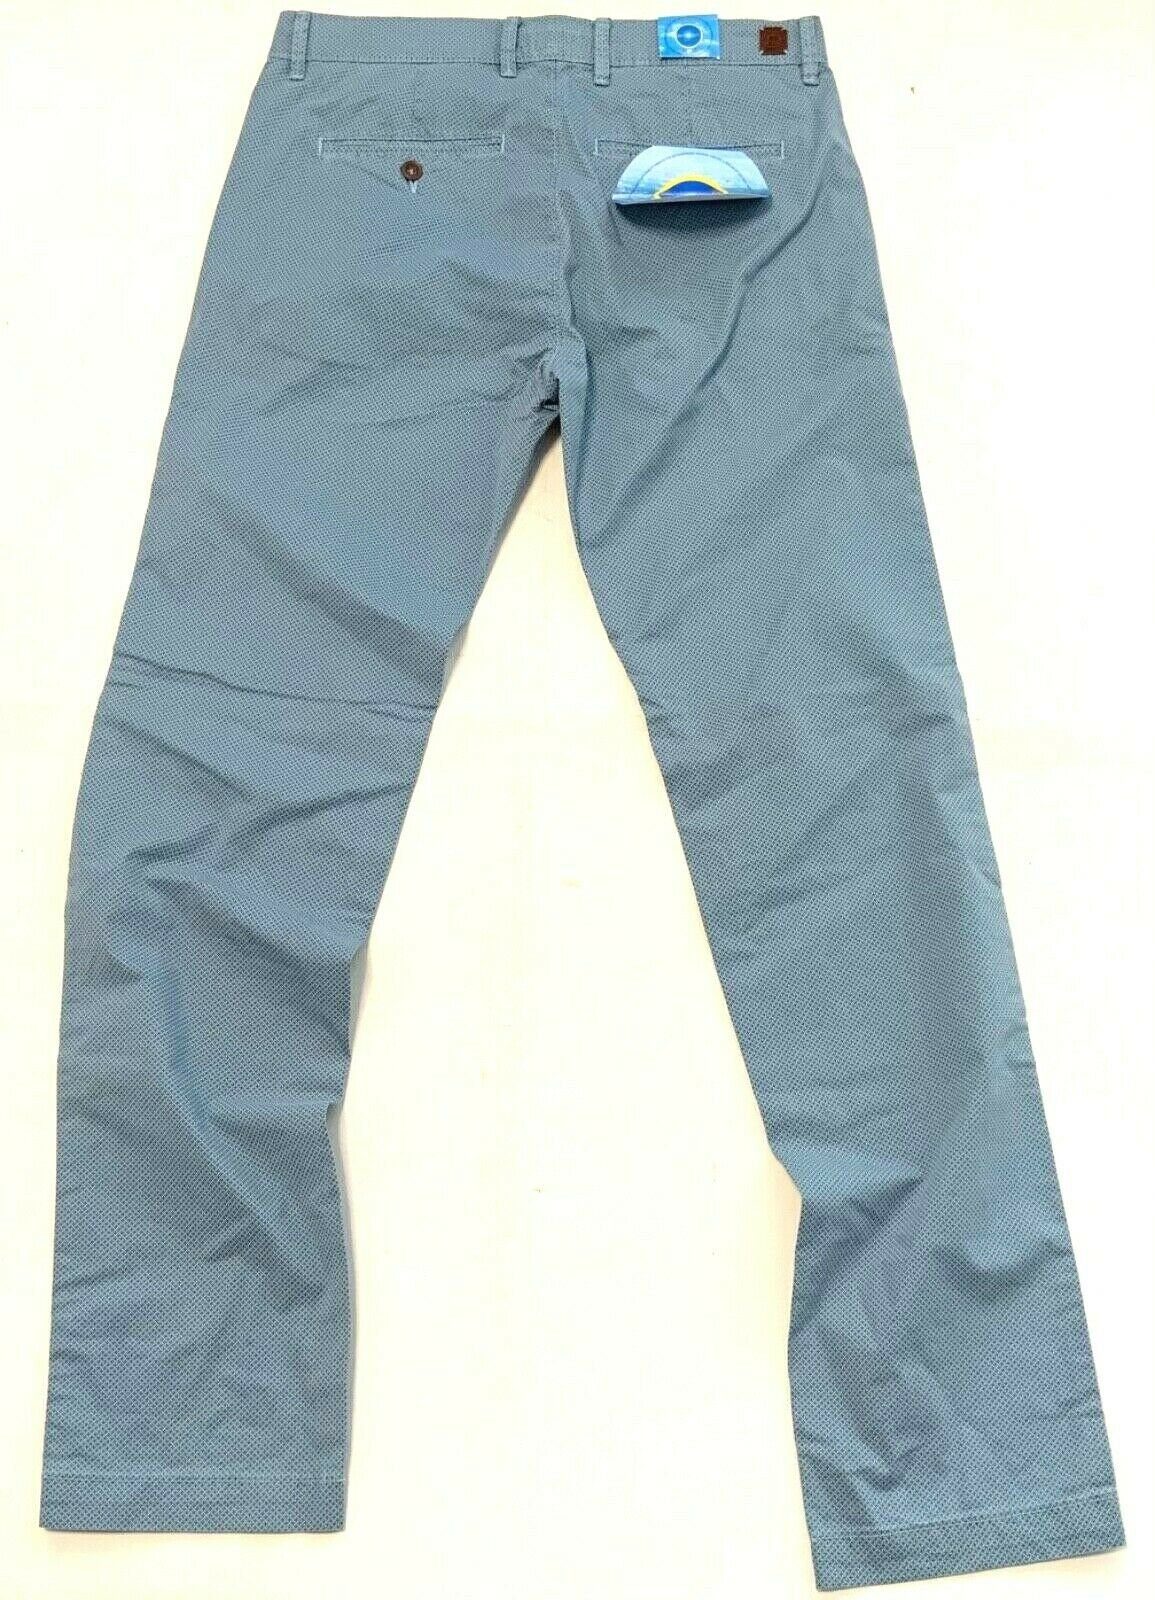 Pierre Cardin Chinohose Jeans airtouch Pierre Cardin Lyon Herren Herren Hose Hosen, Cardin Pierre Chino